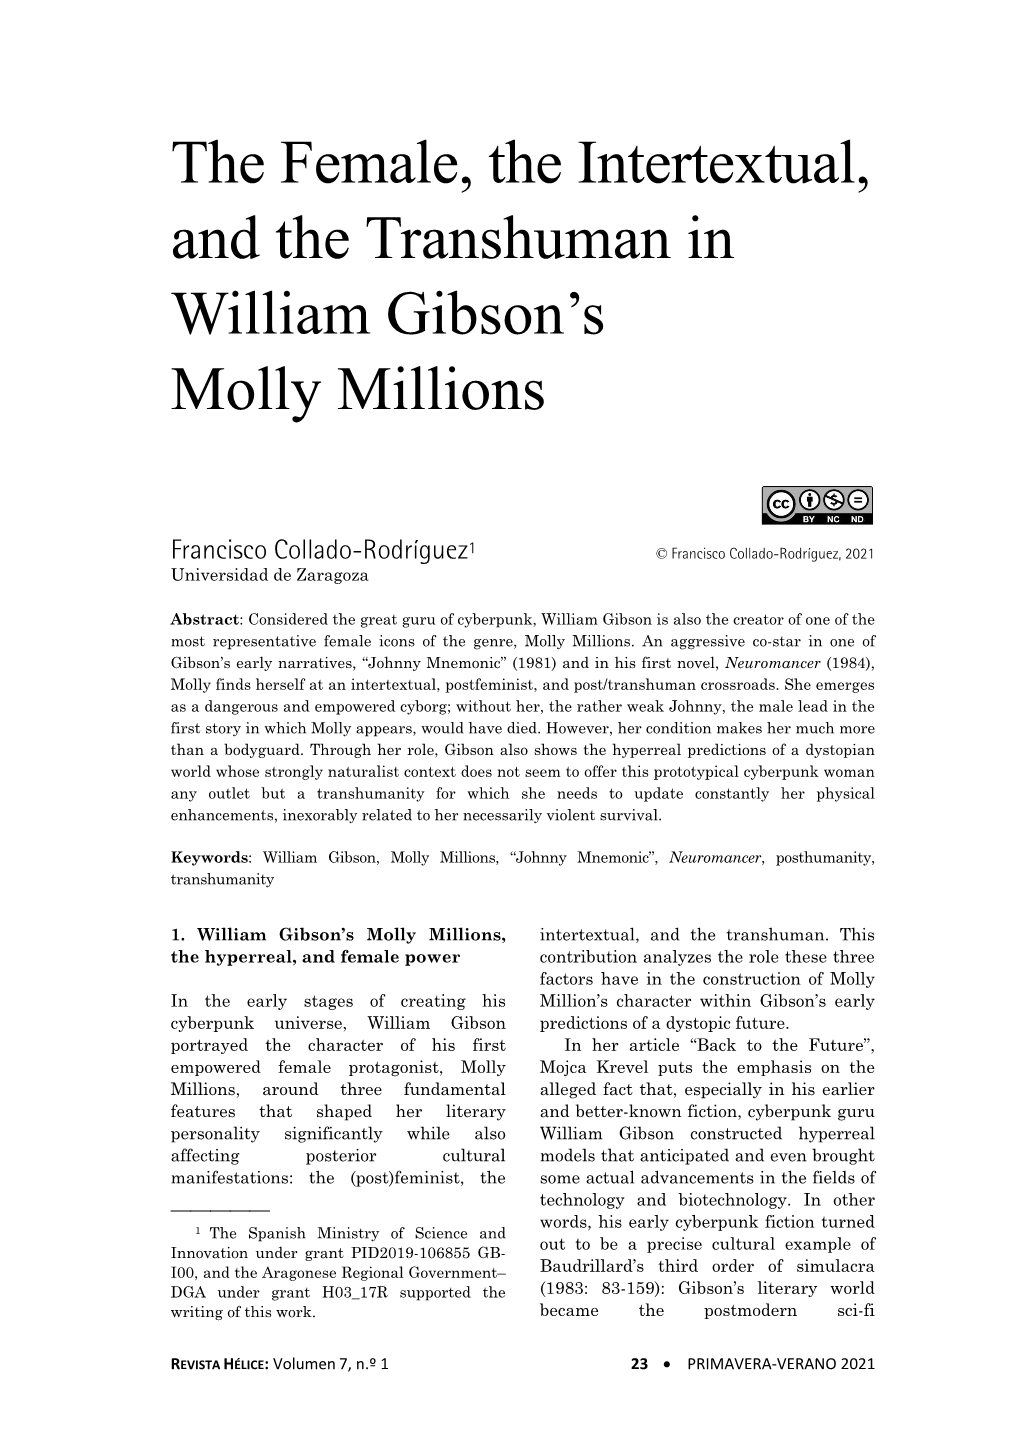 The Female, the Intertextual, and the Transhuman in William Gibson’S Molly Millions